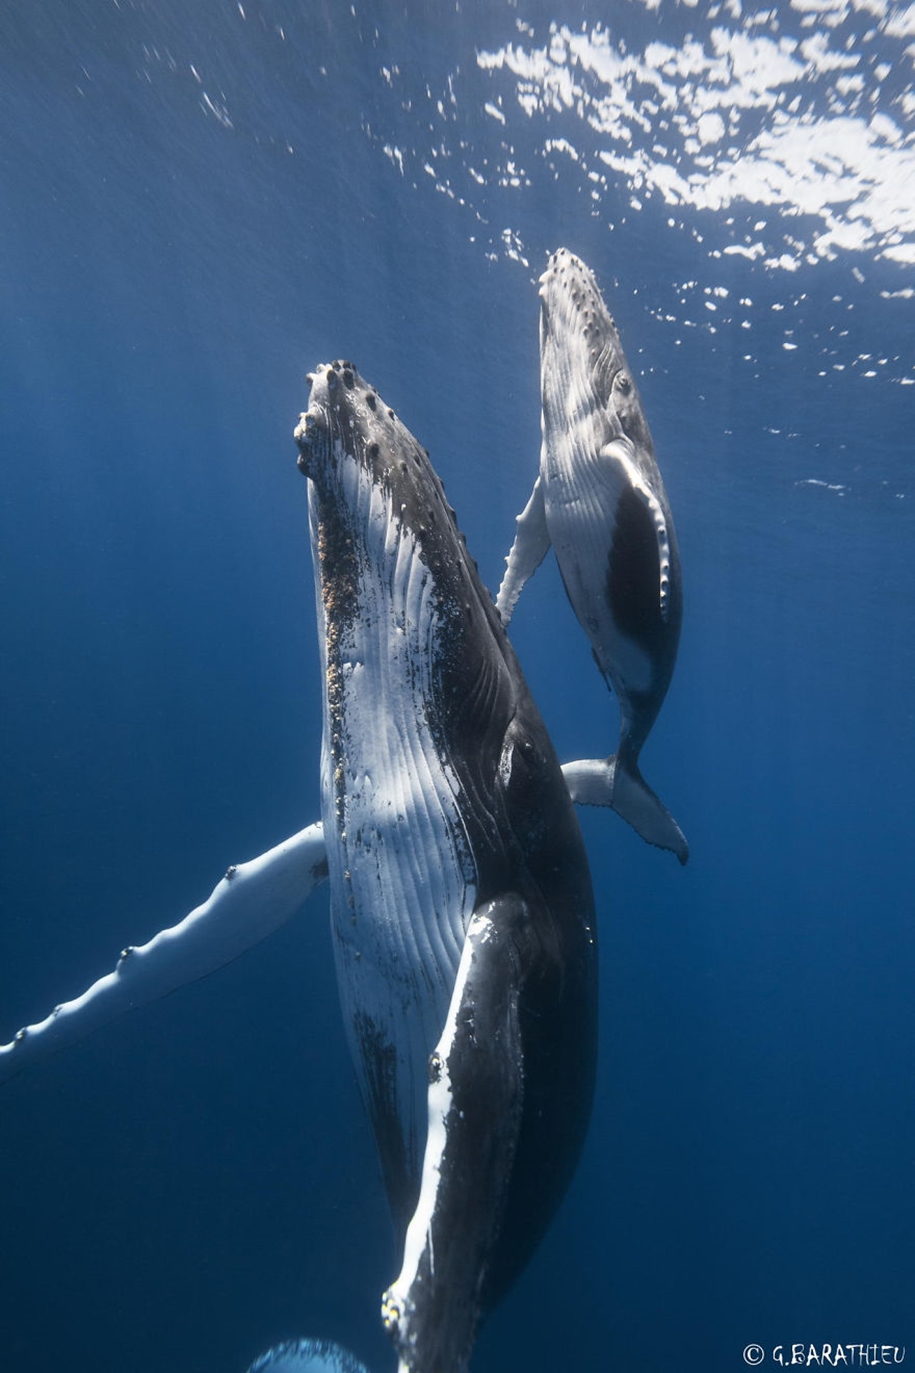 Majestic photos of whales 15